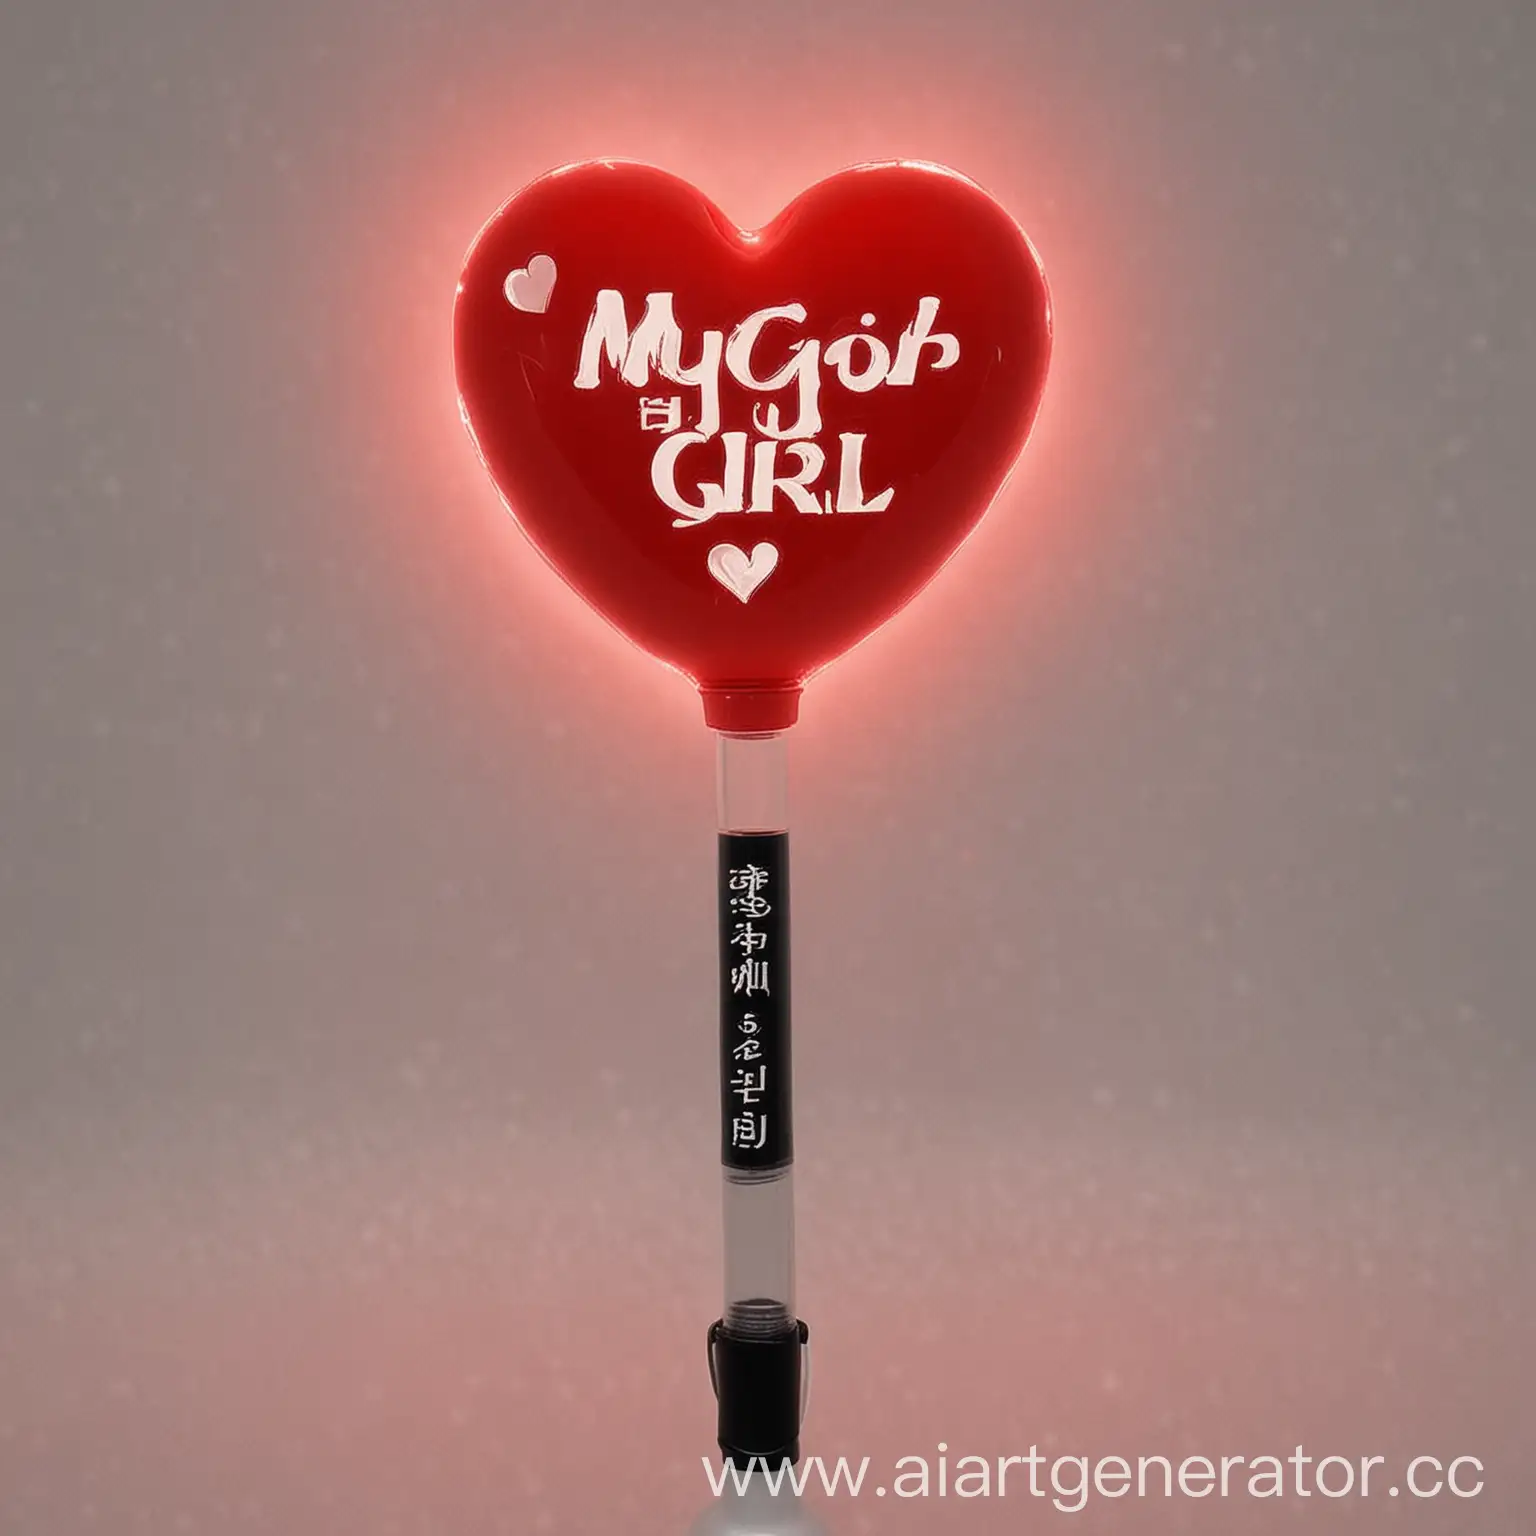 Kpop-Lightstick-Hearts-with-BlackRed-Inscription-A-Romantic-Gesture-for-My-Girl